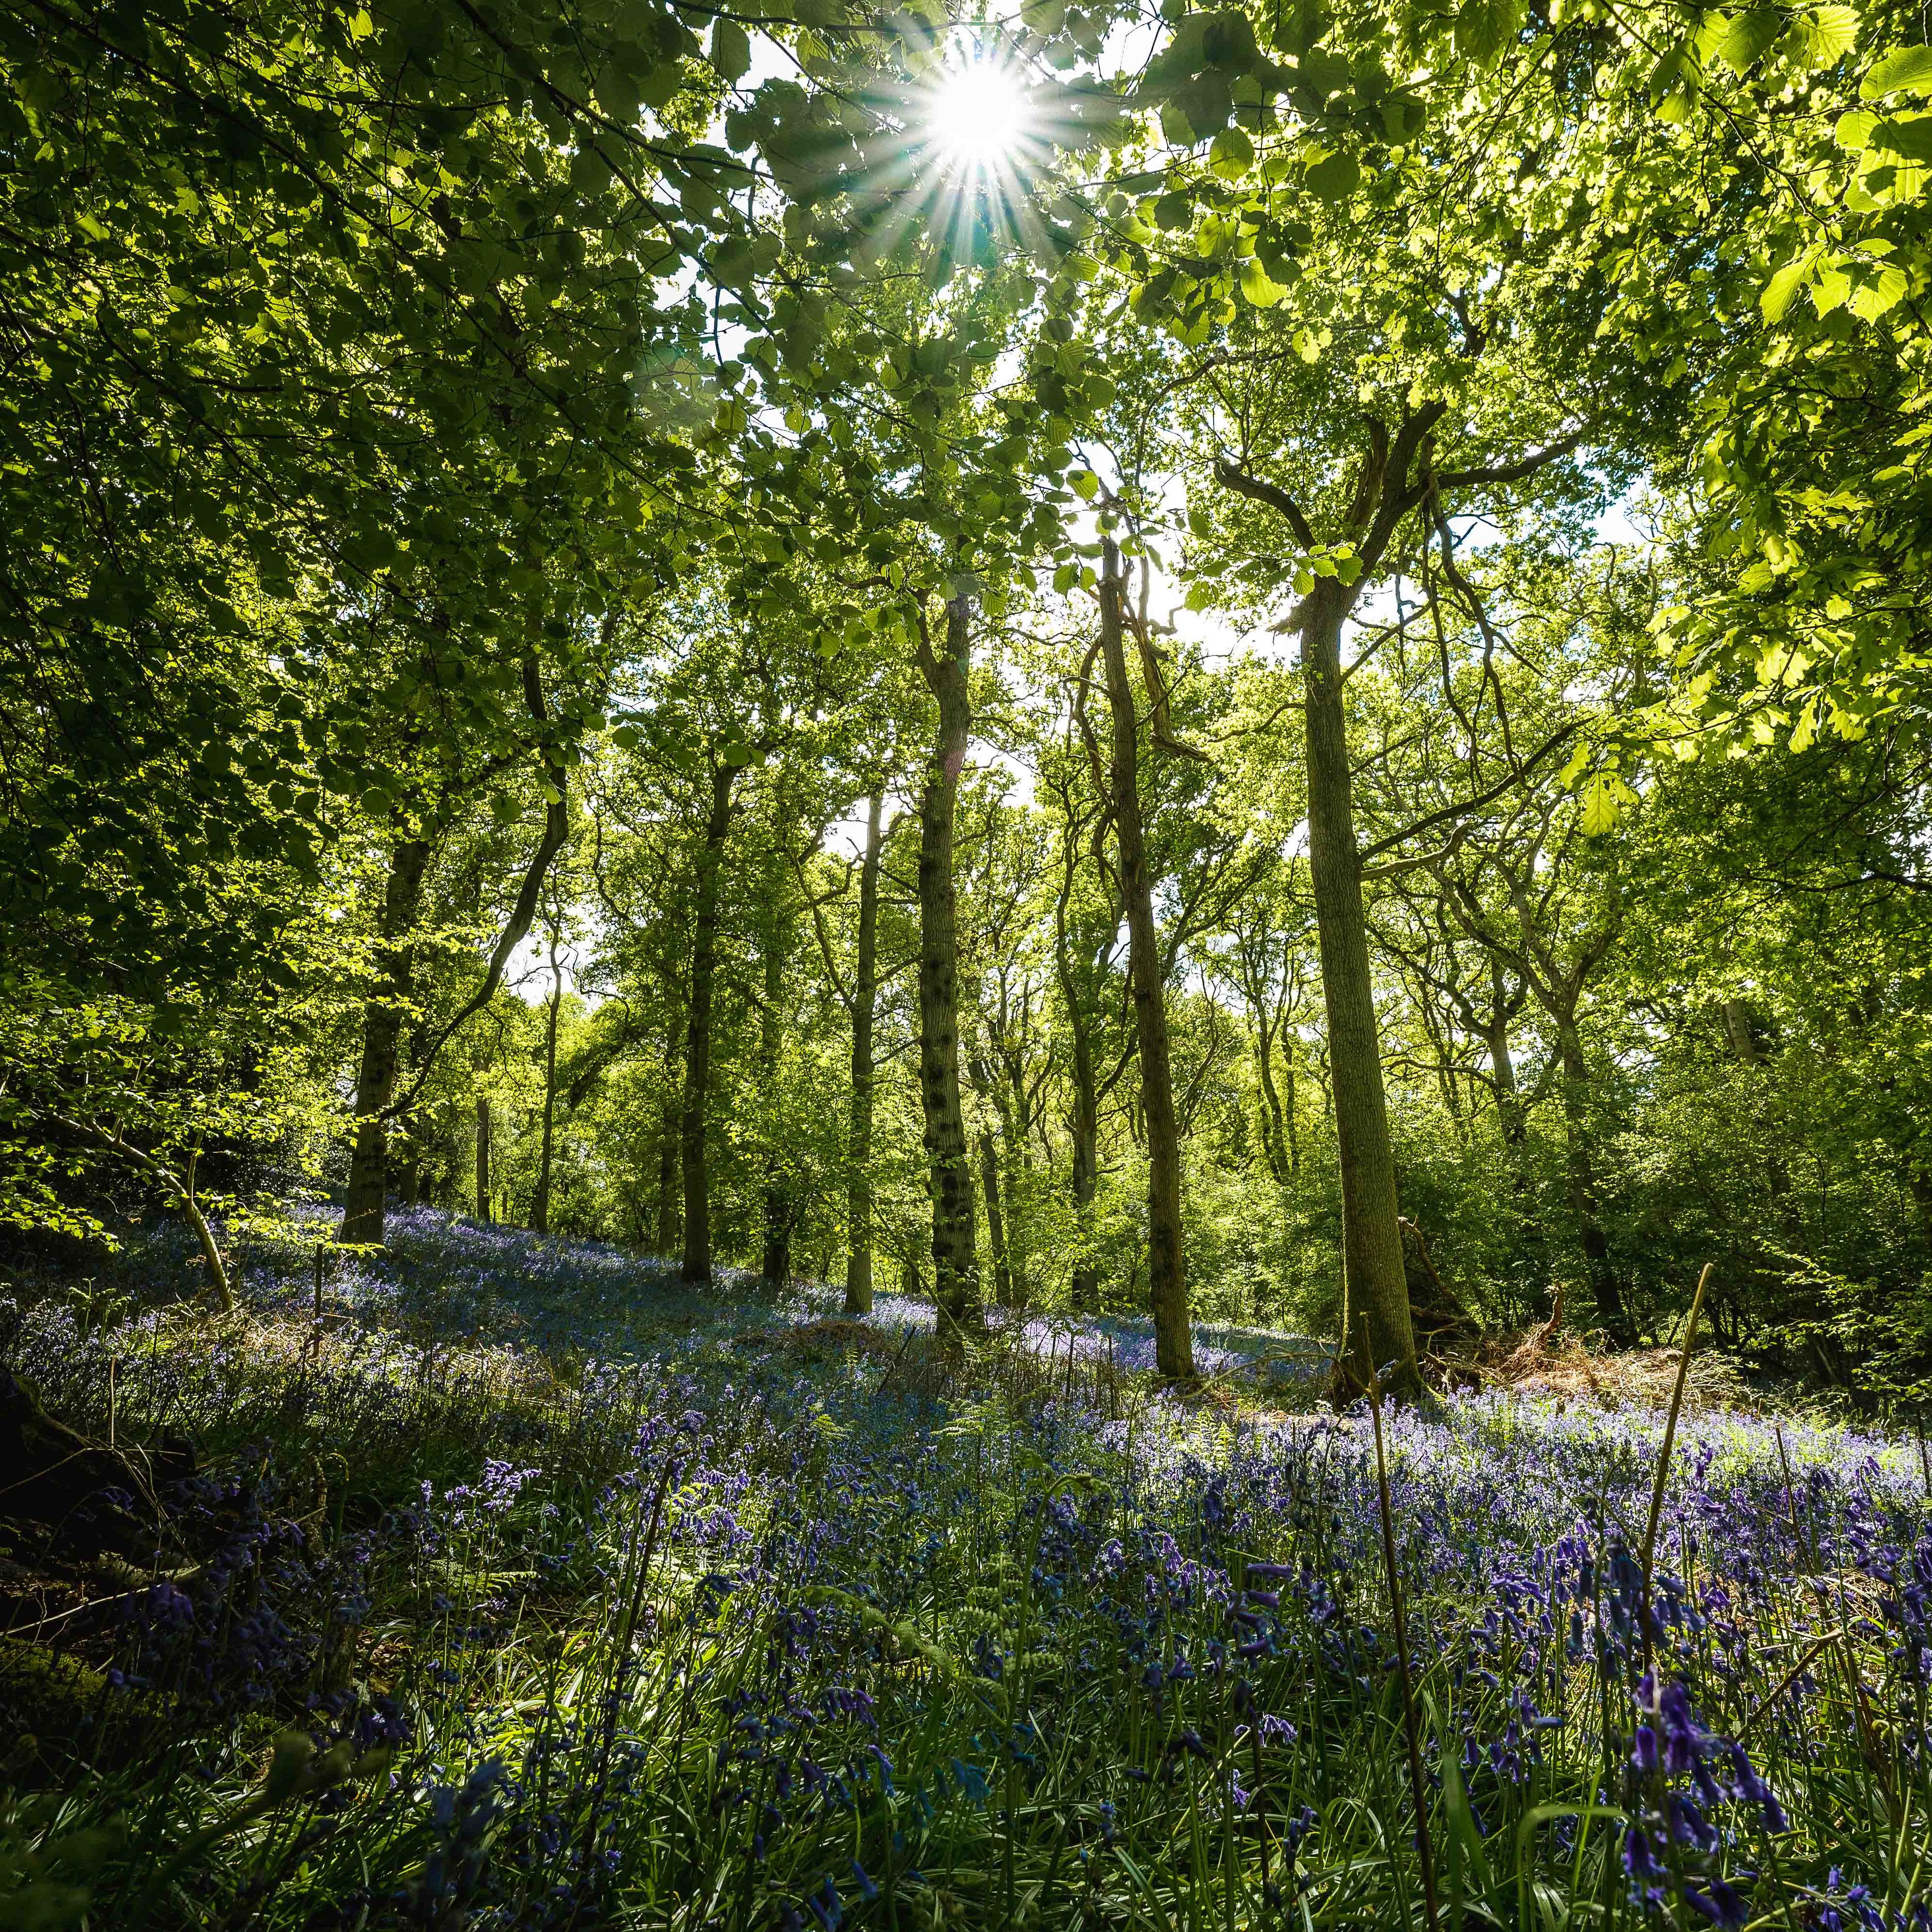 A carpet of bluebells on the Forest floor with tall trees and the sunshining through the branches